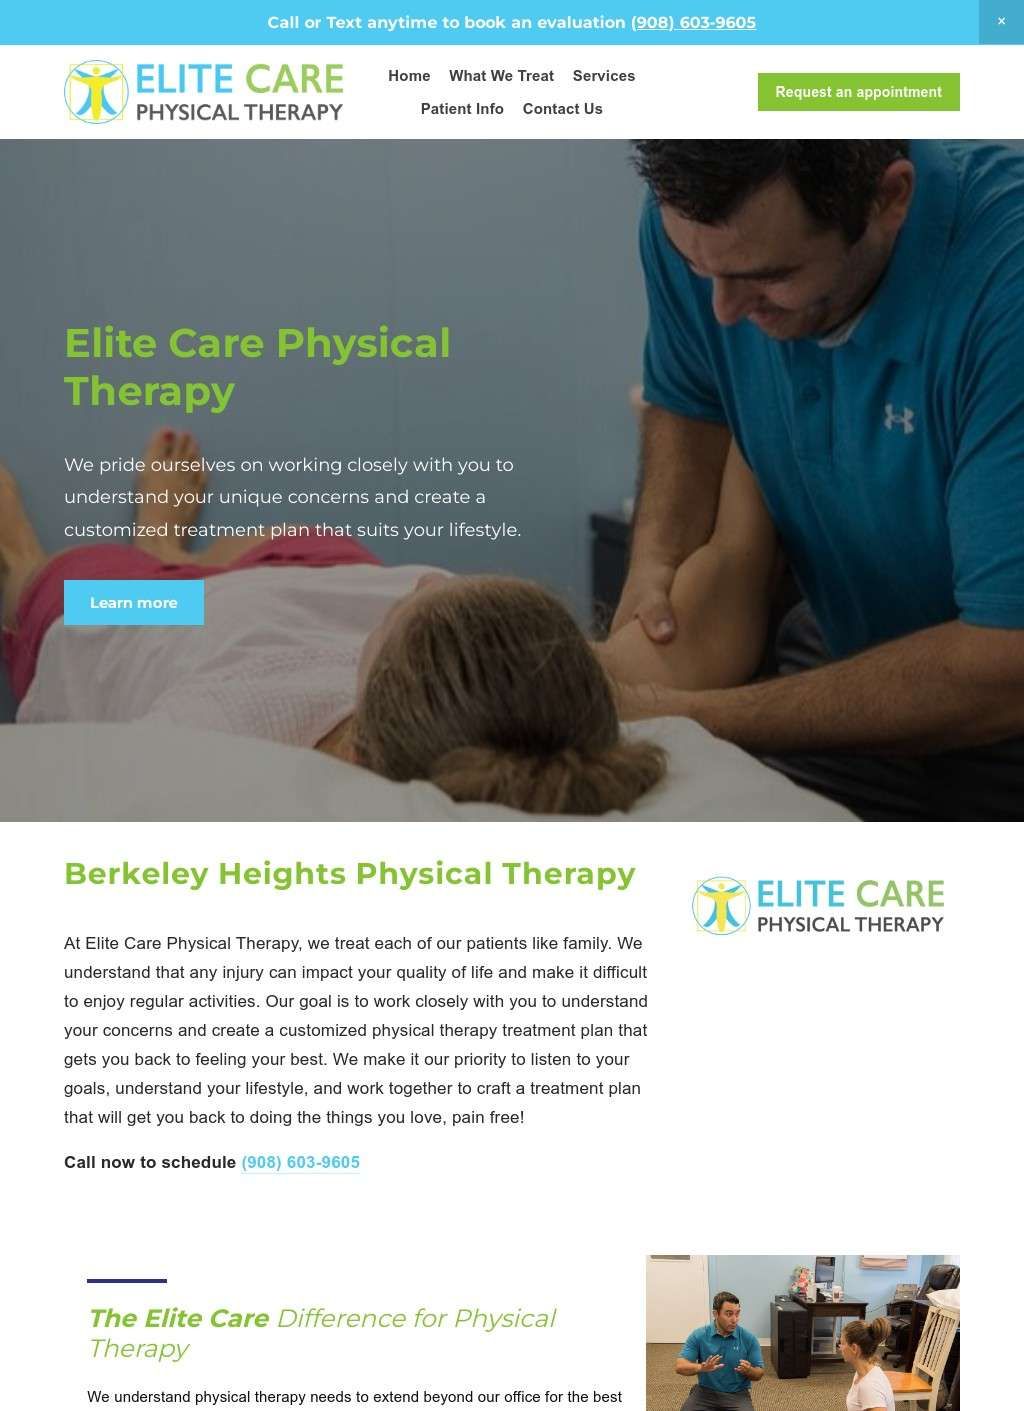 Berkeley Heights Physical Therapy